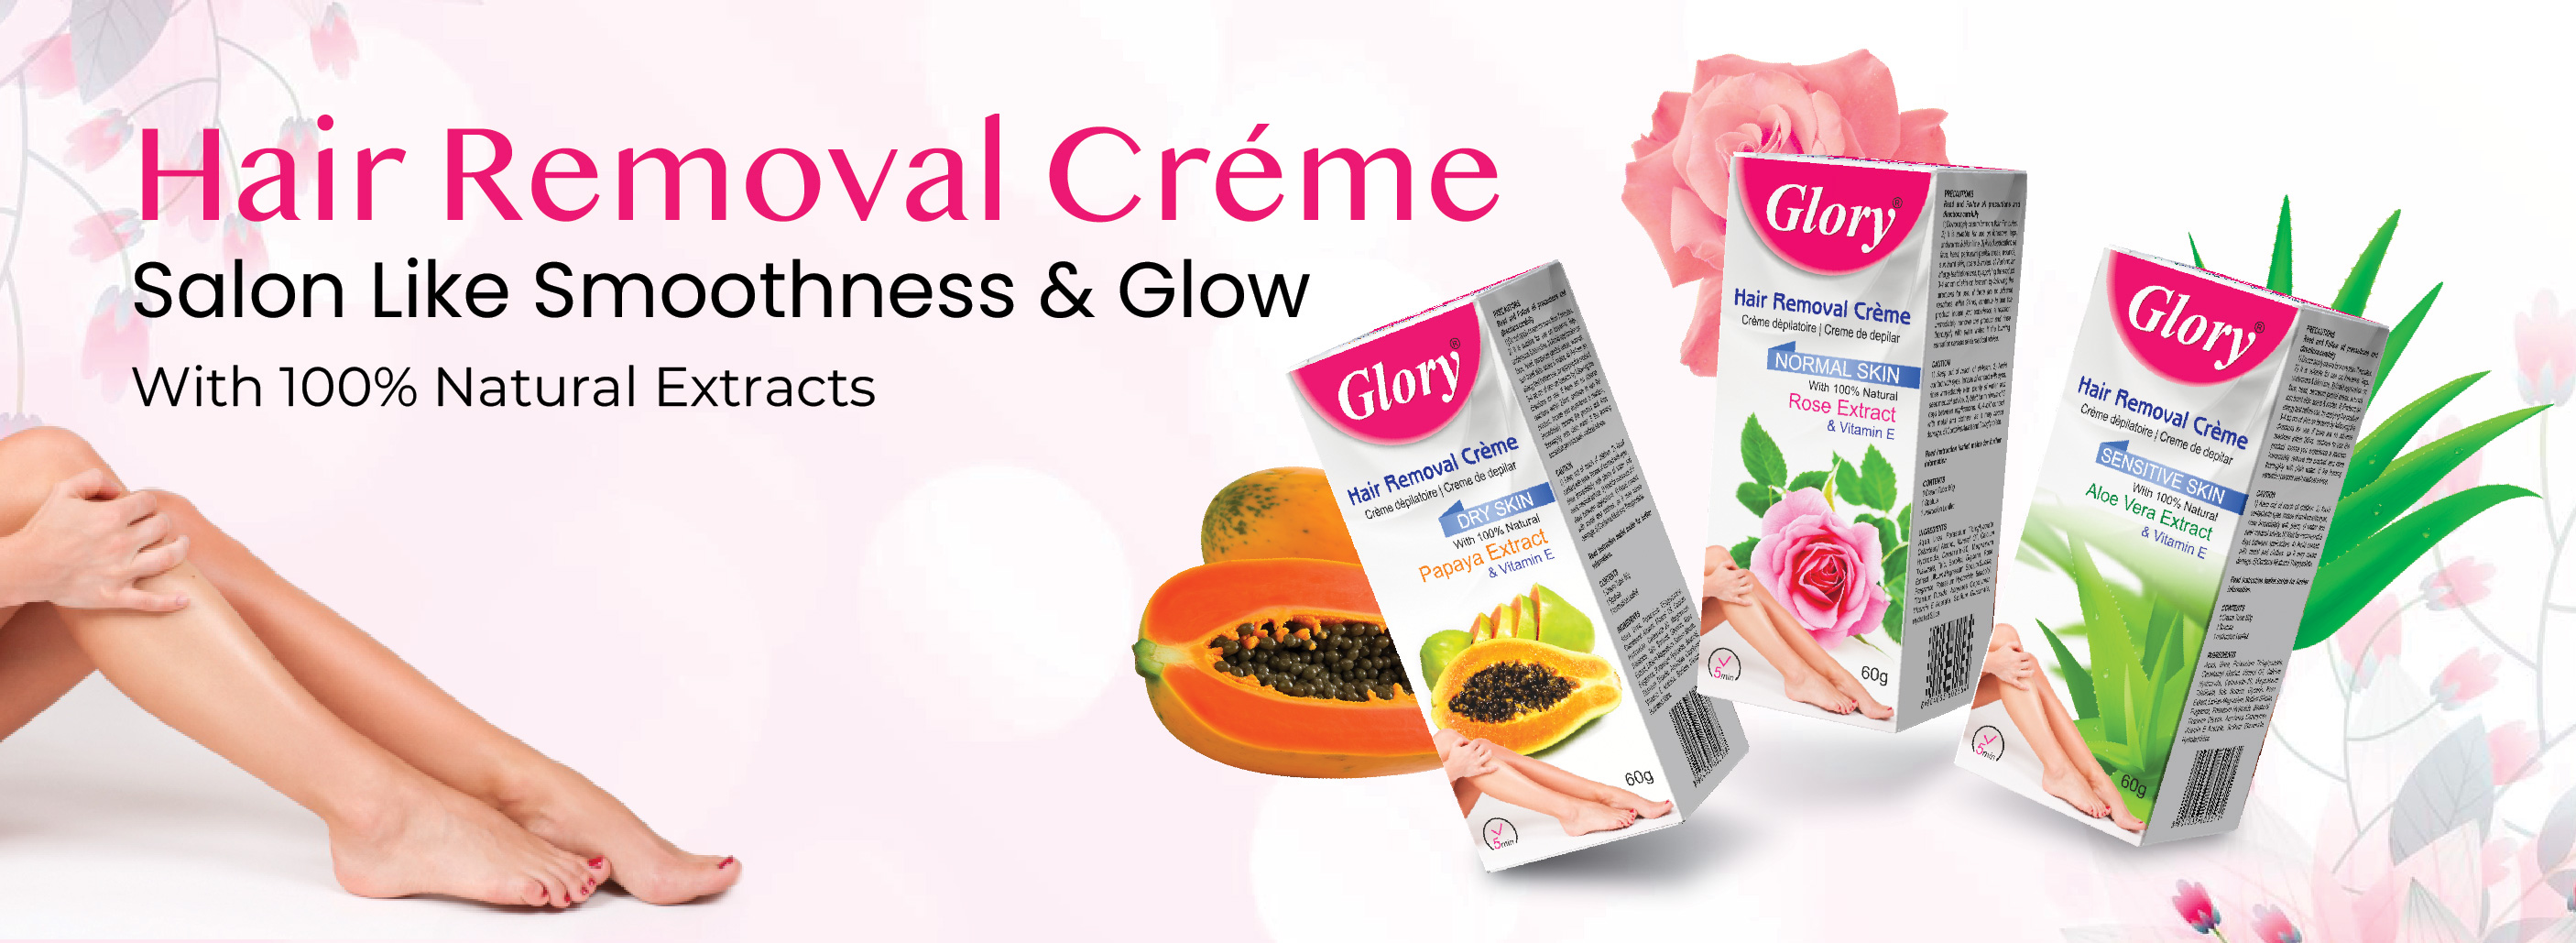 Hair Removal Creme Manufacturer | Hair Removal Creme Manufacturer in Mozambique